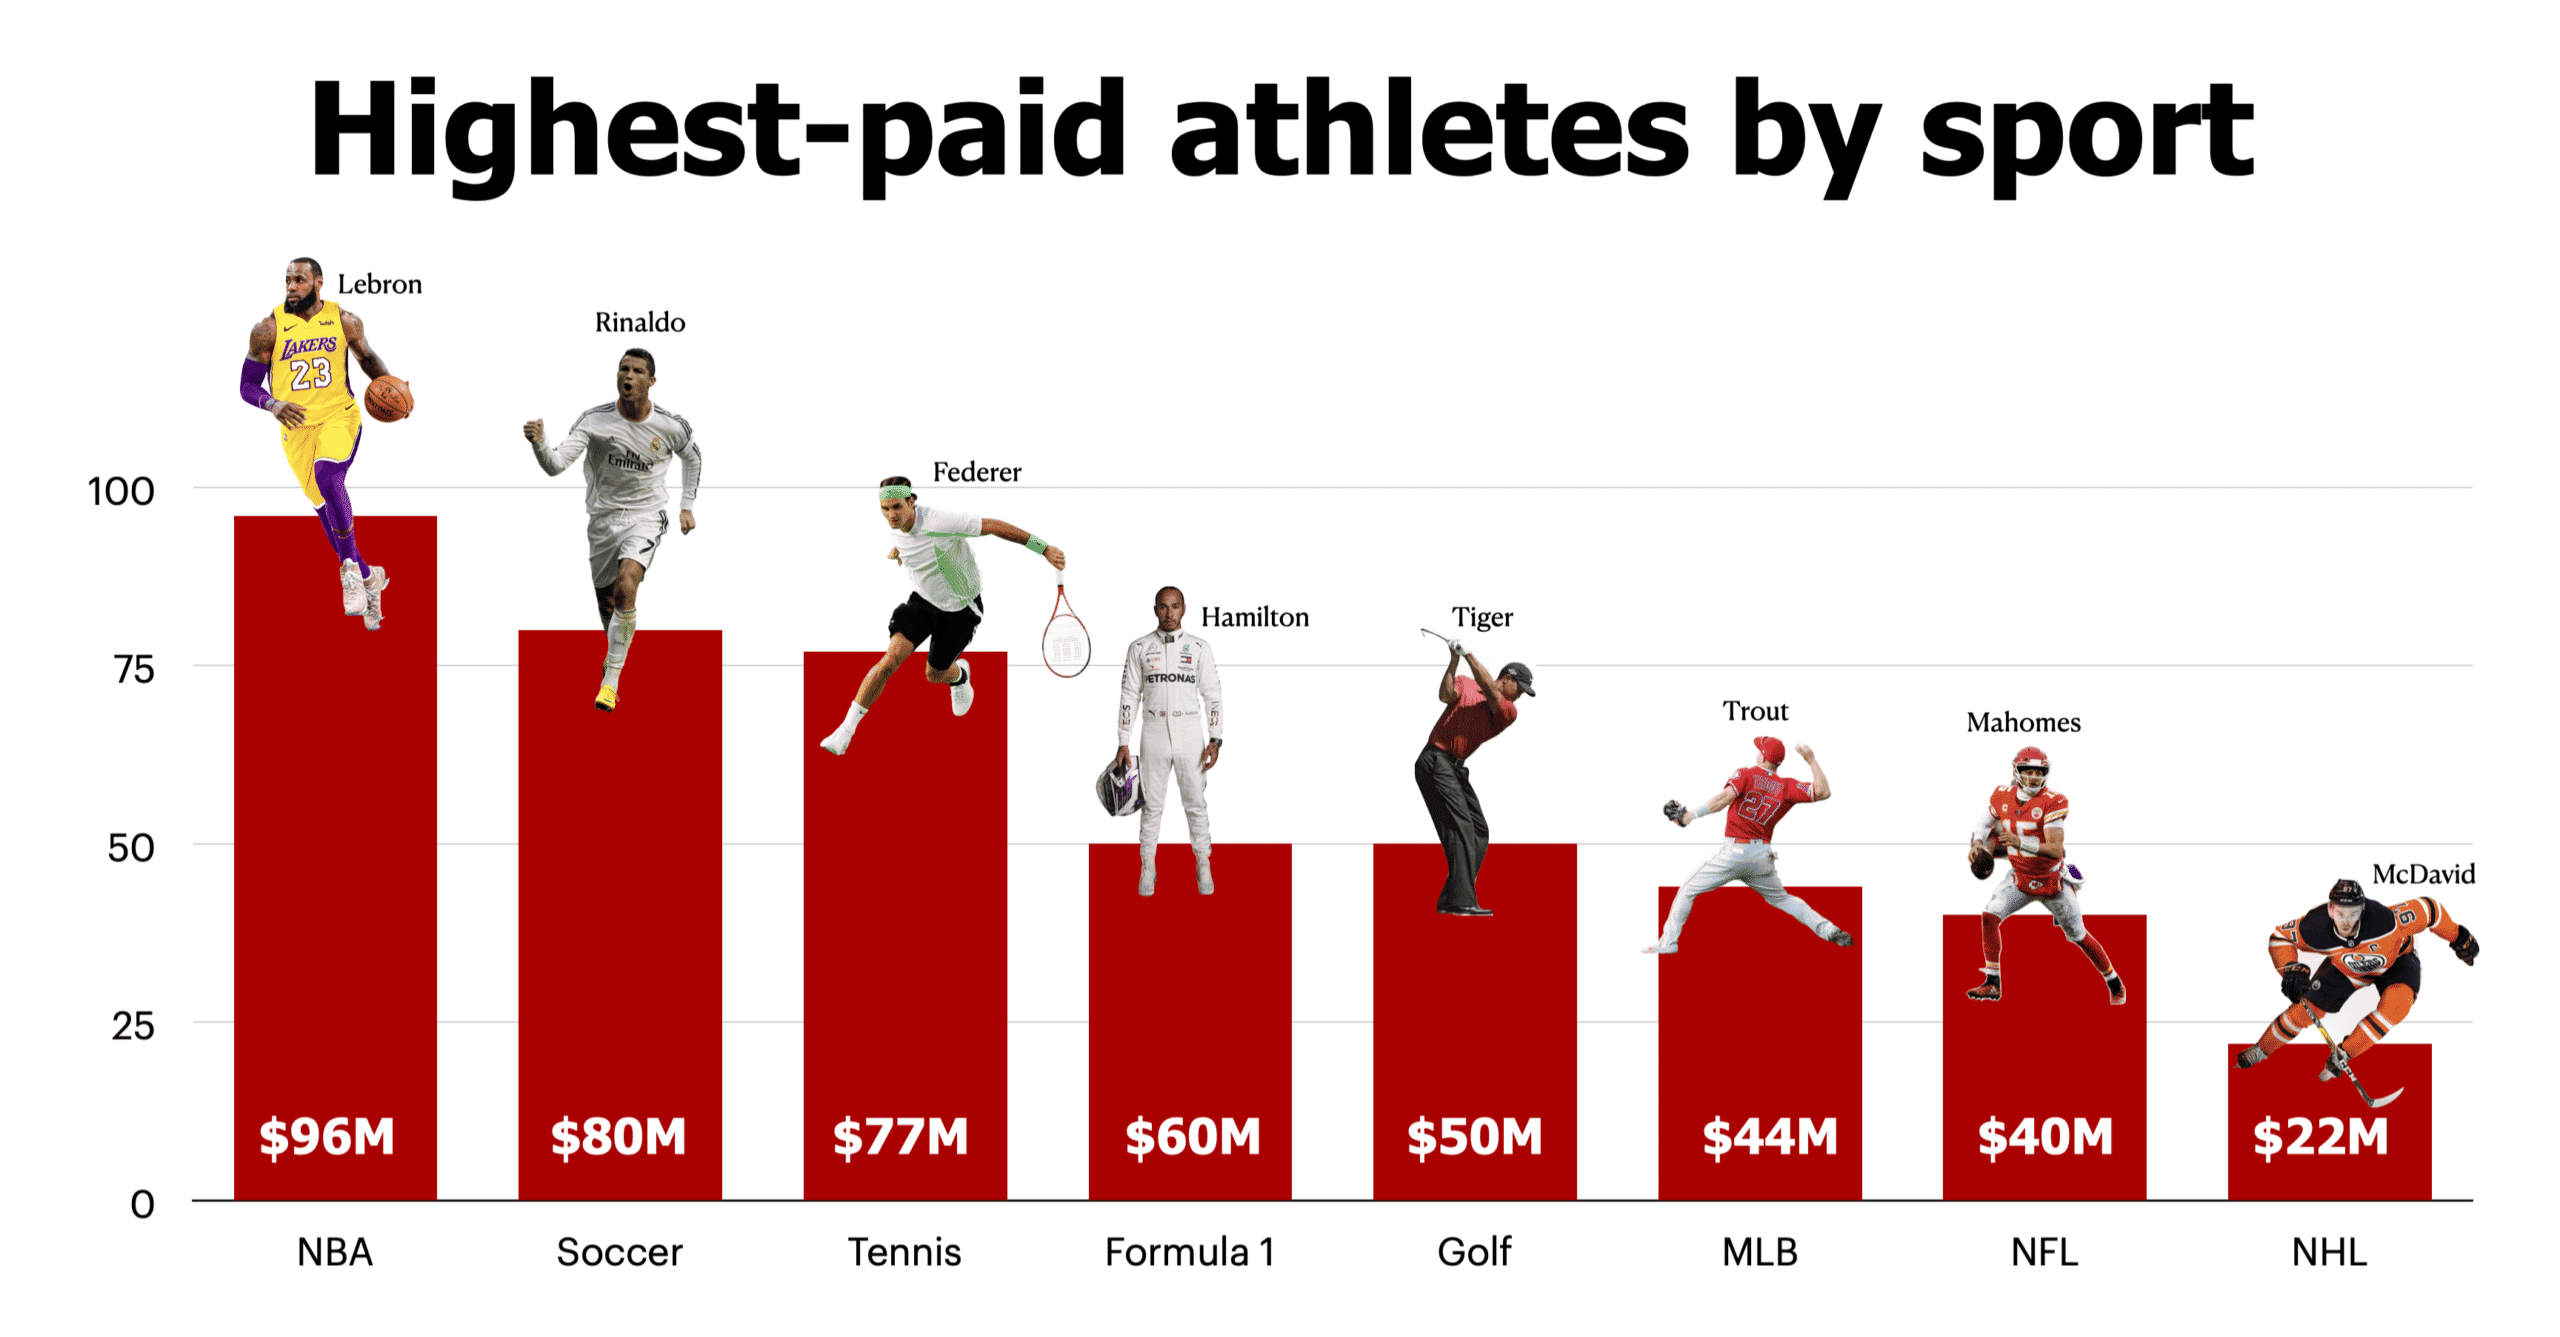 Highest-paid athletes by sport